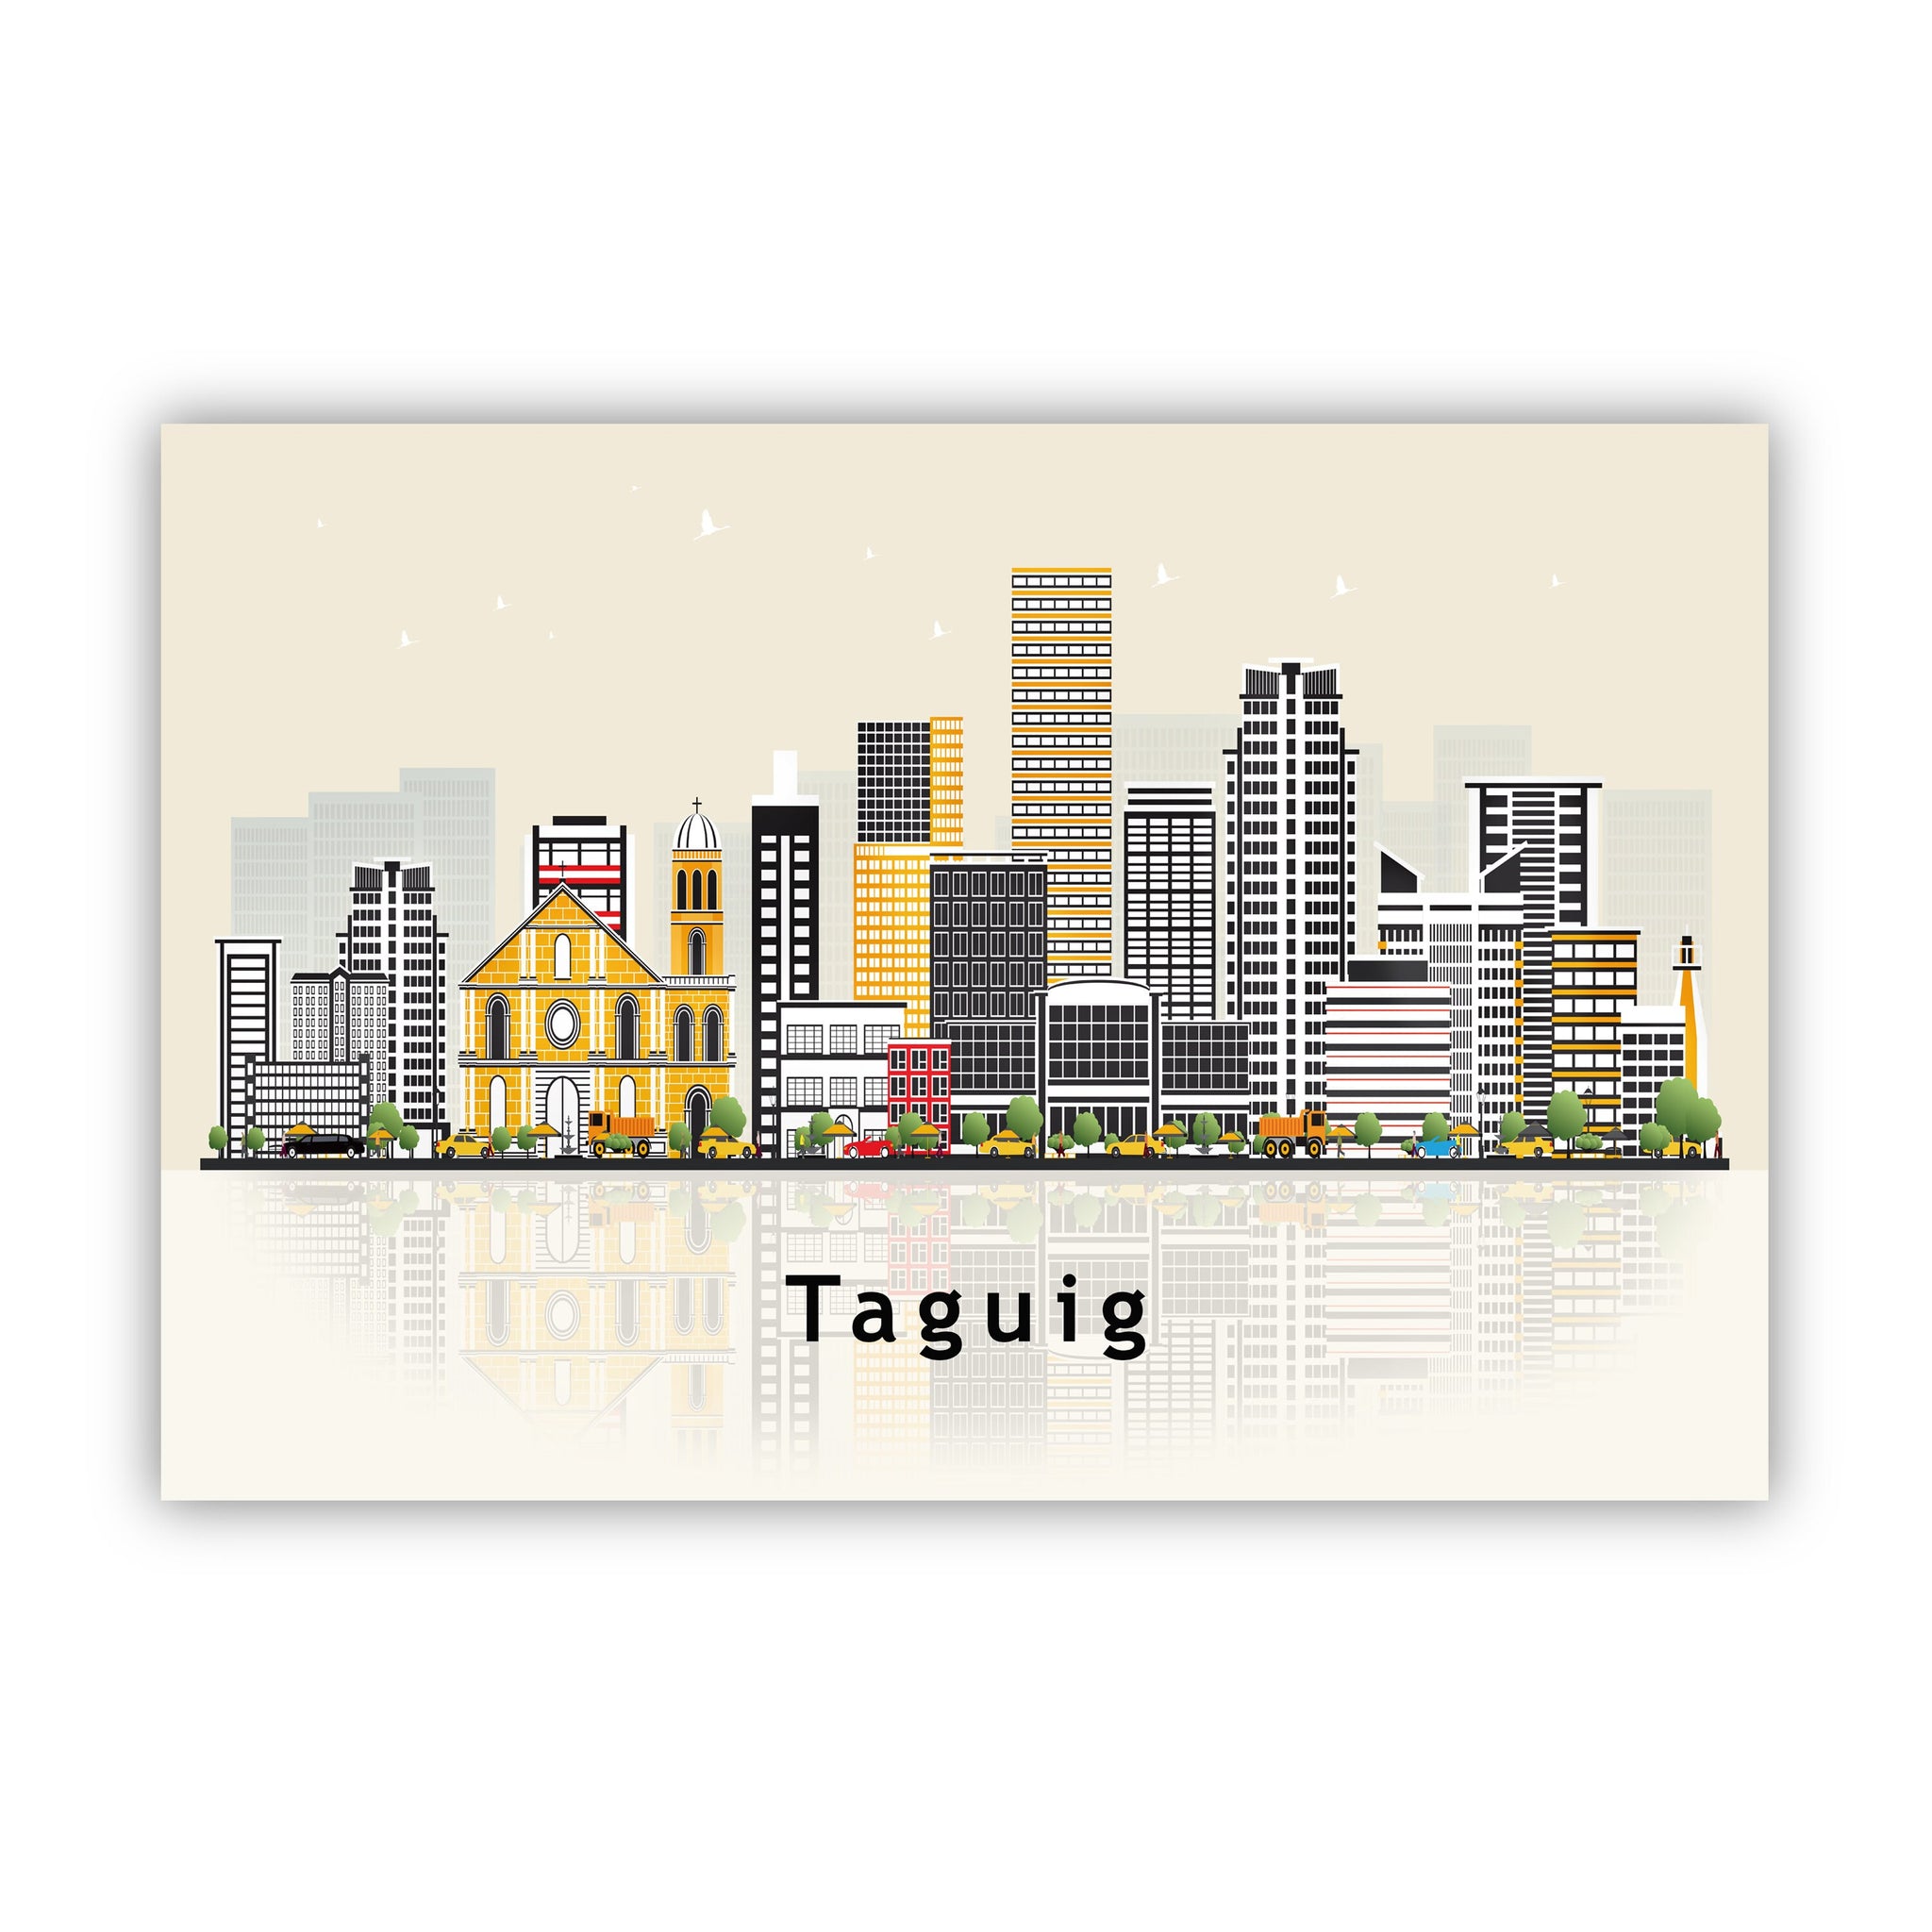 TAGUIG PHILIPPINES Illustration skyline poster, Modern skyline cityscape poster, Taguig skyline landmark map poster, Home wall decorations